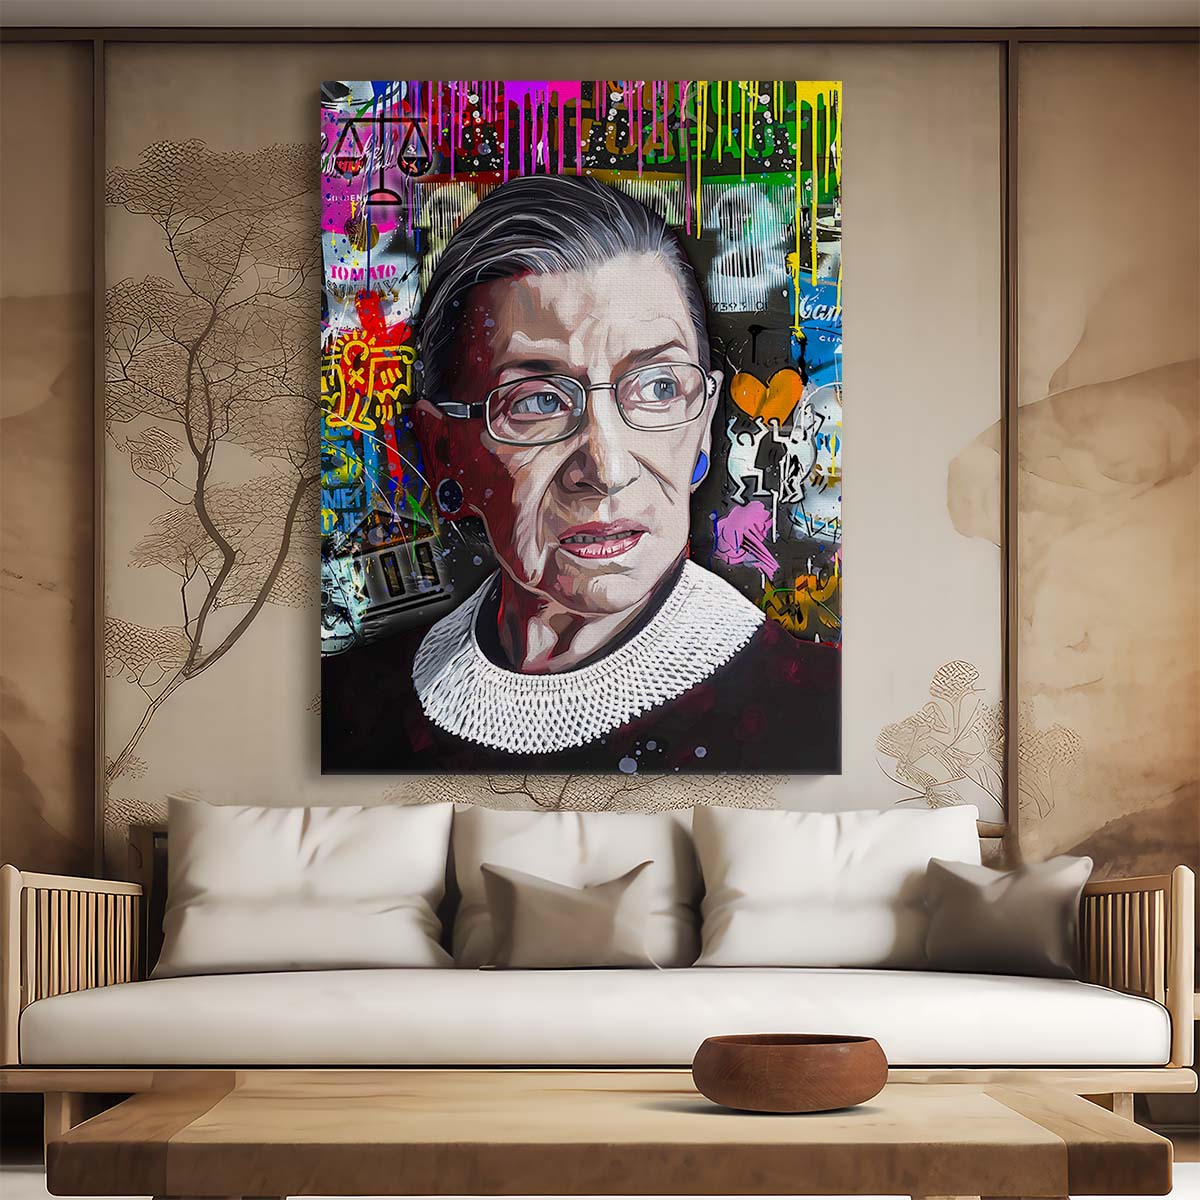 Justice Ruth Bader Ginsburg Portrait Graffiti Wall Art by Luxuriance Designs. Made in USA.